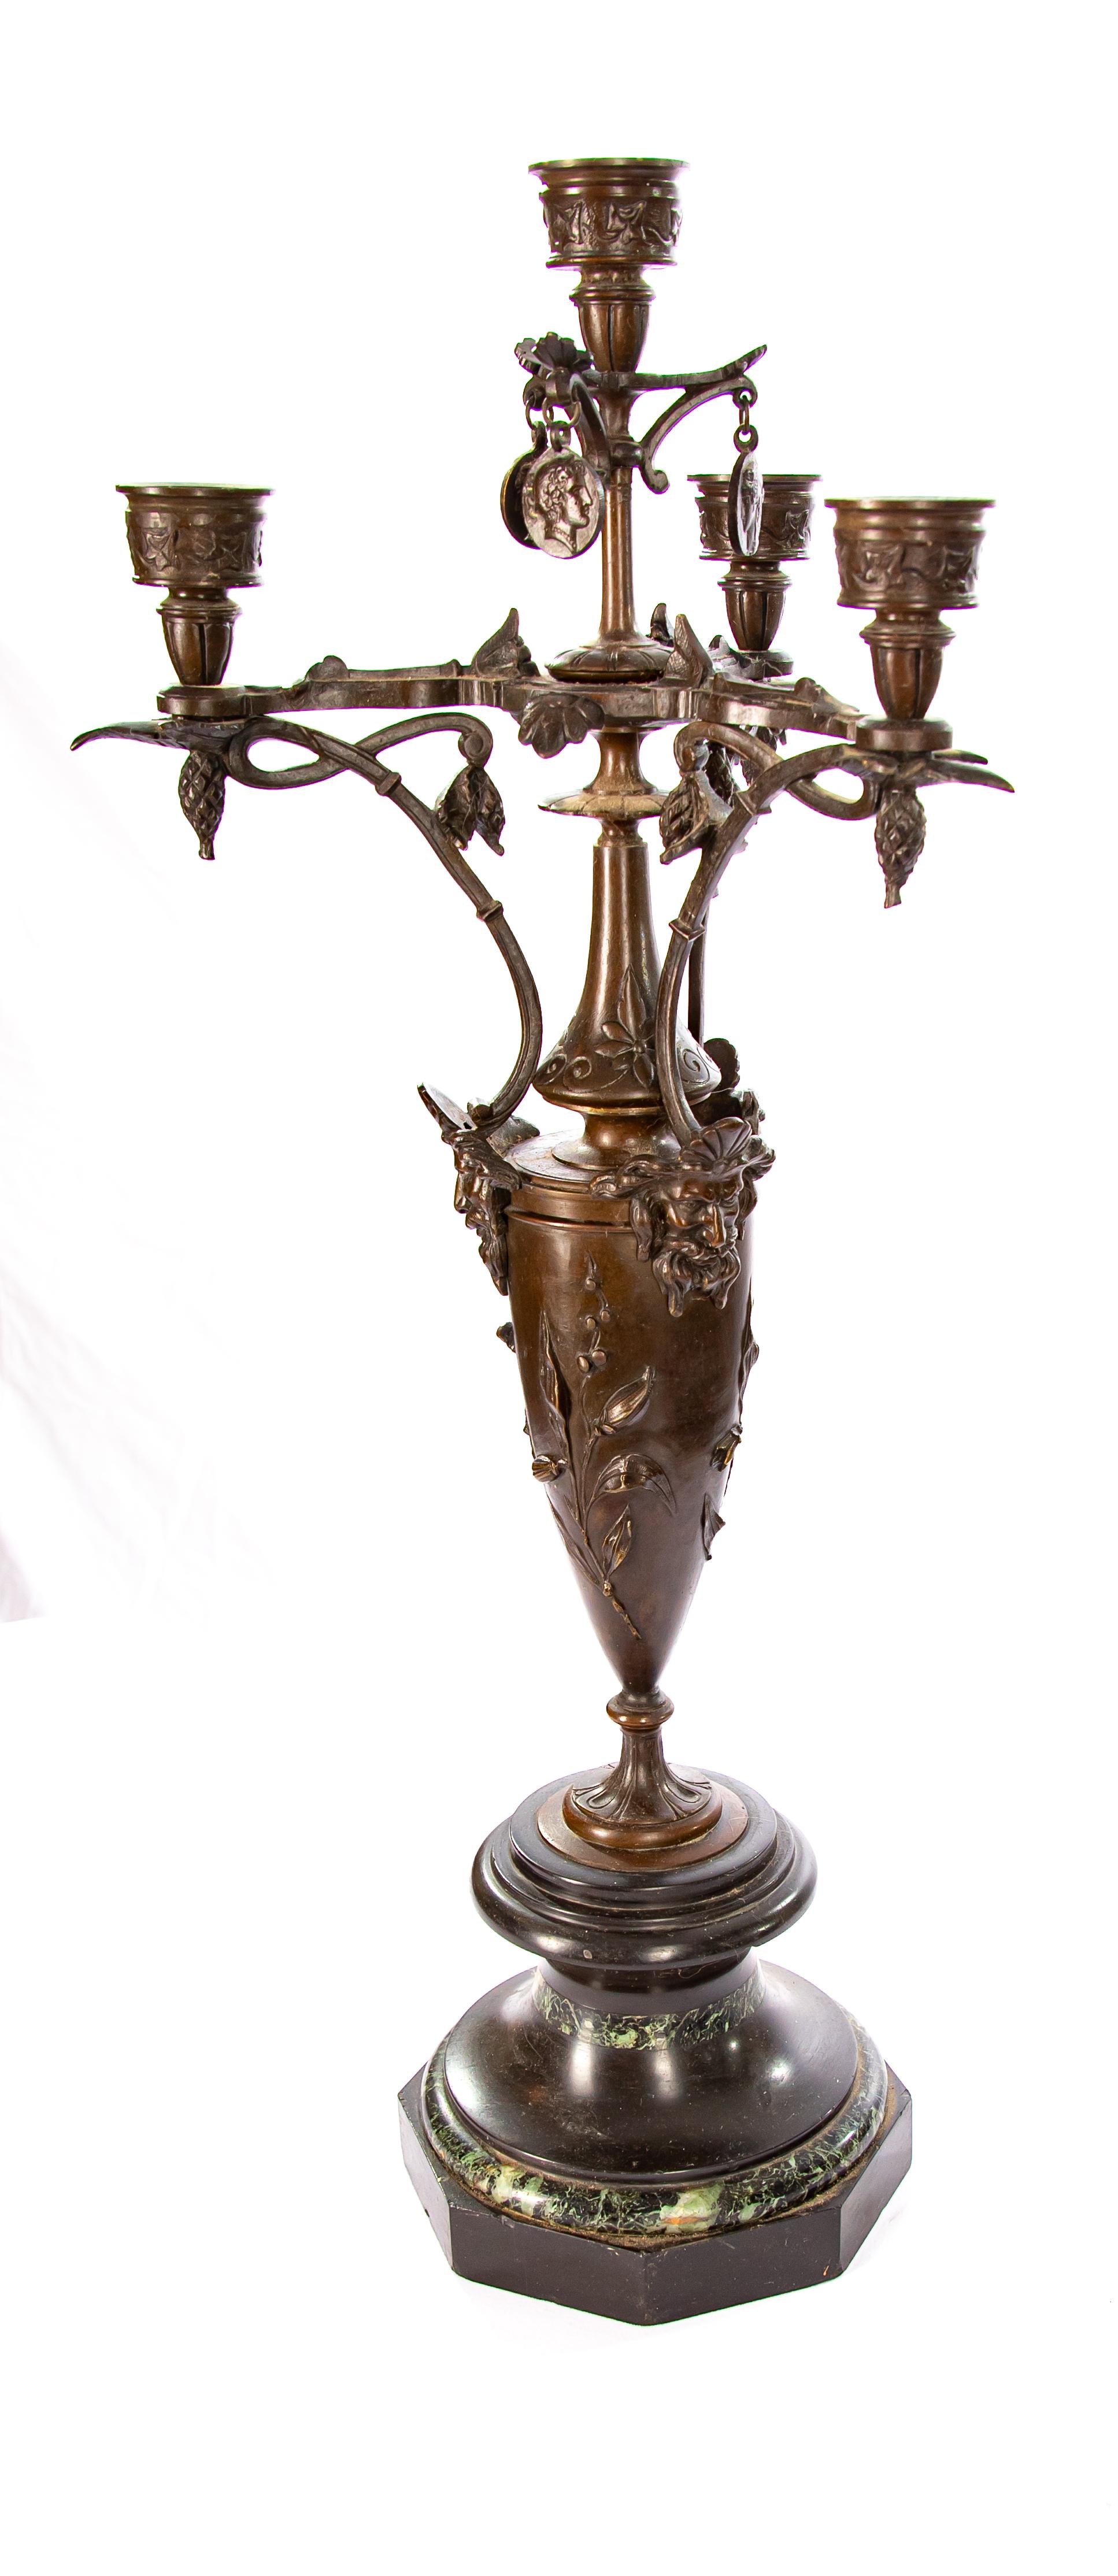 Offering this magnificent pair of art nouveau candelabras. Starting on a base that is hand painted to look like marble. It rises to a foliate spacer then the main body has floral details. Around the body at the top is three heads. From there it tops